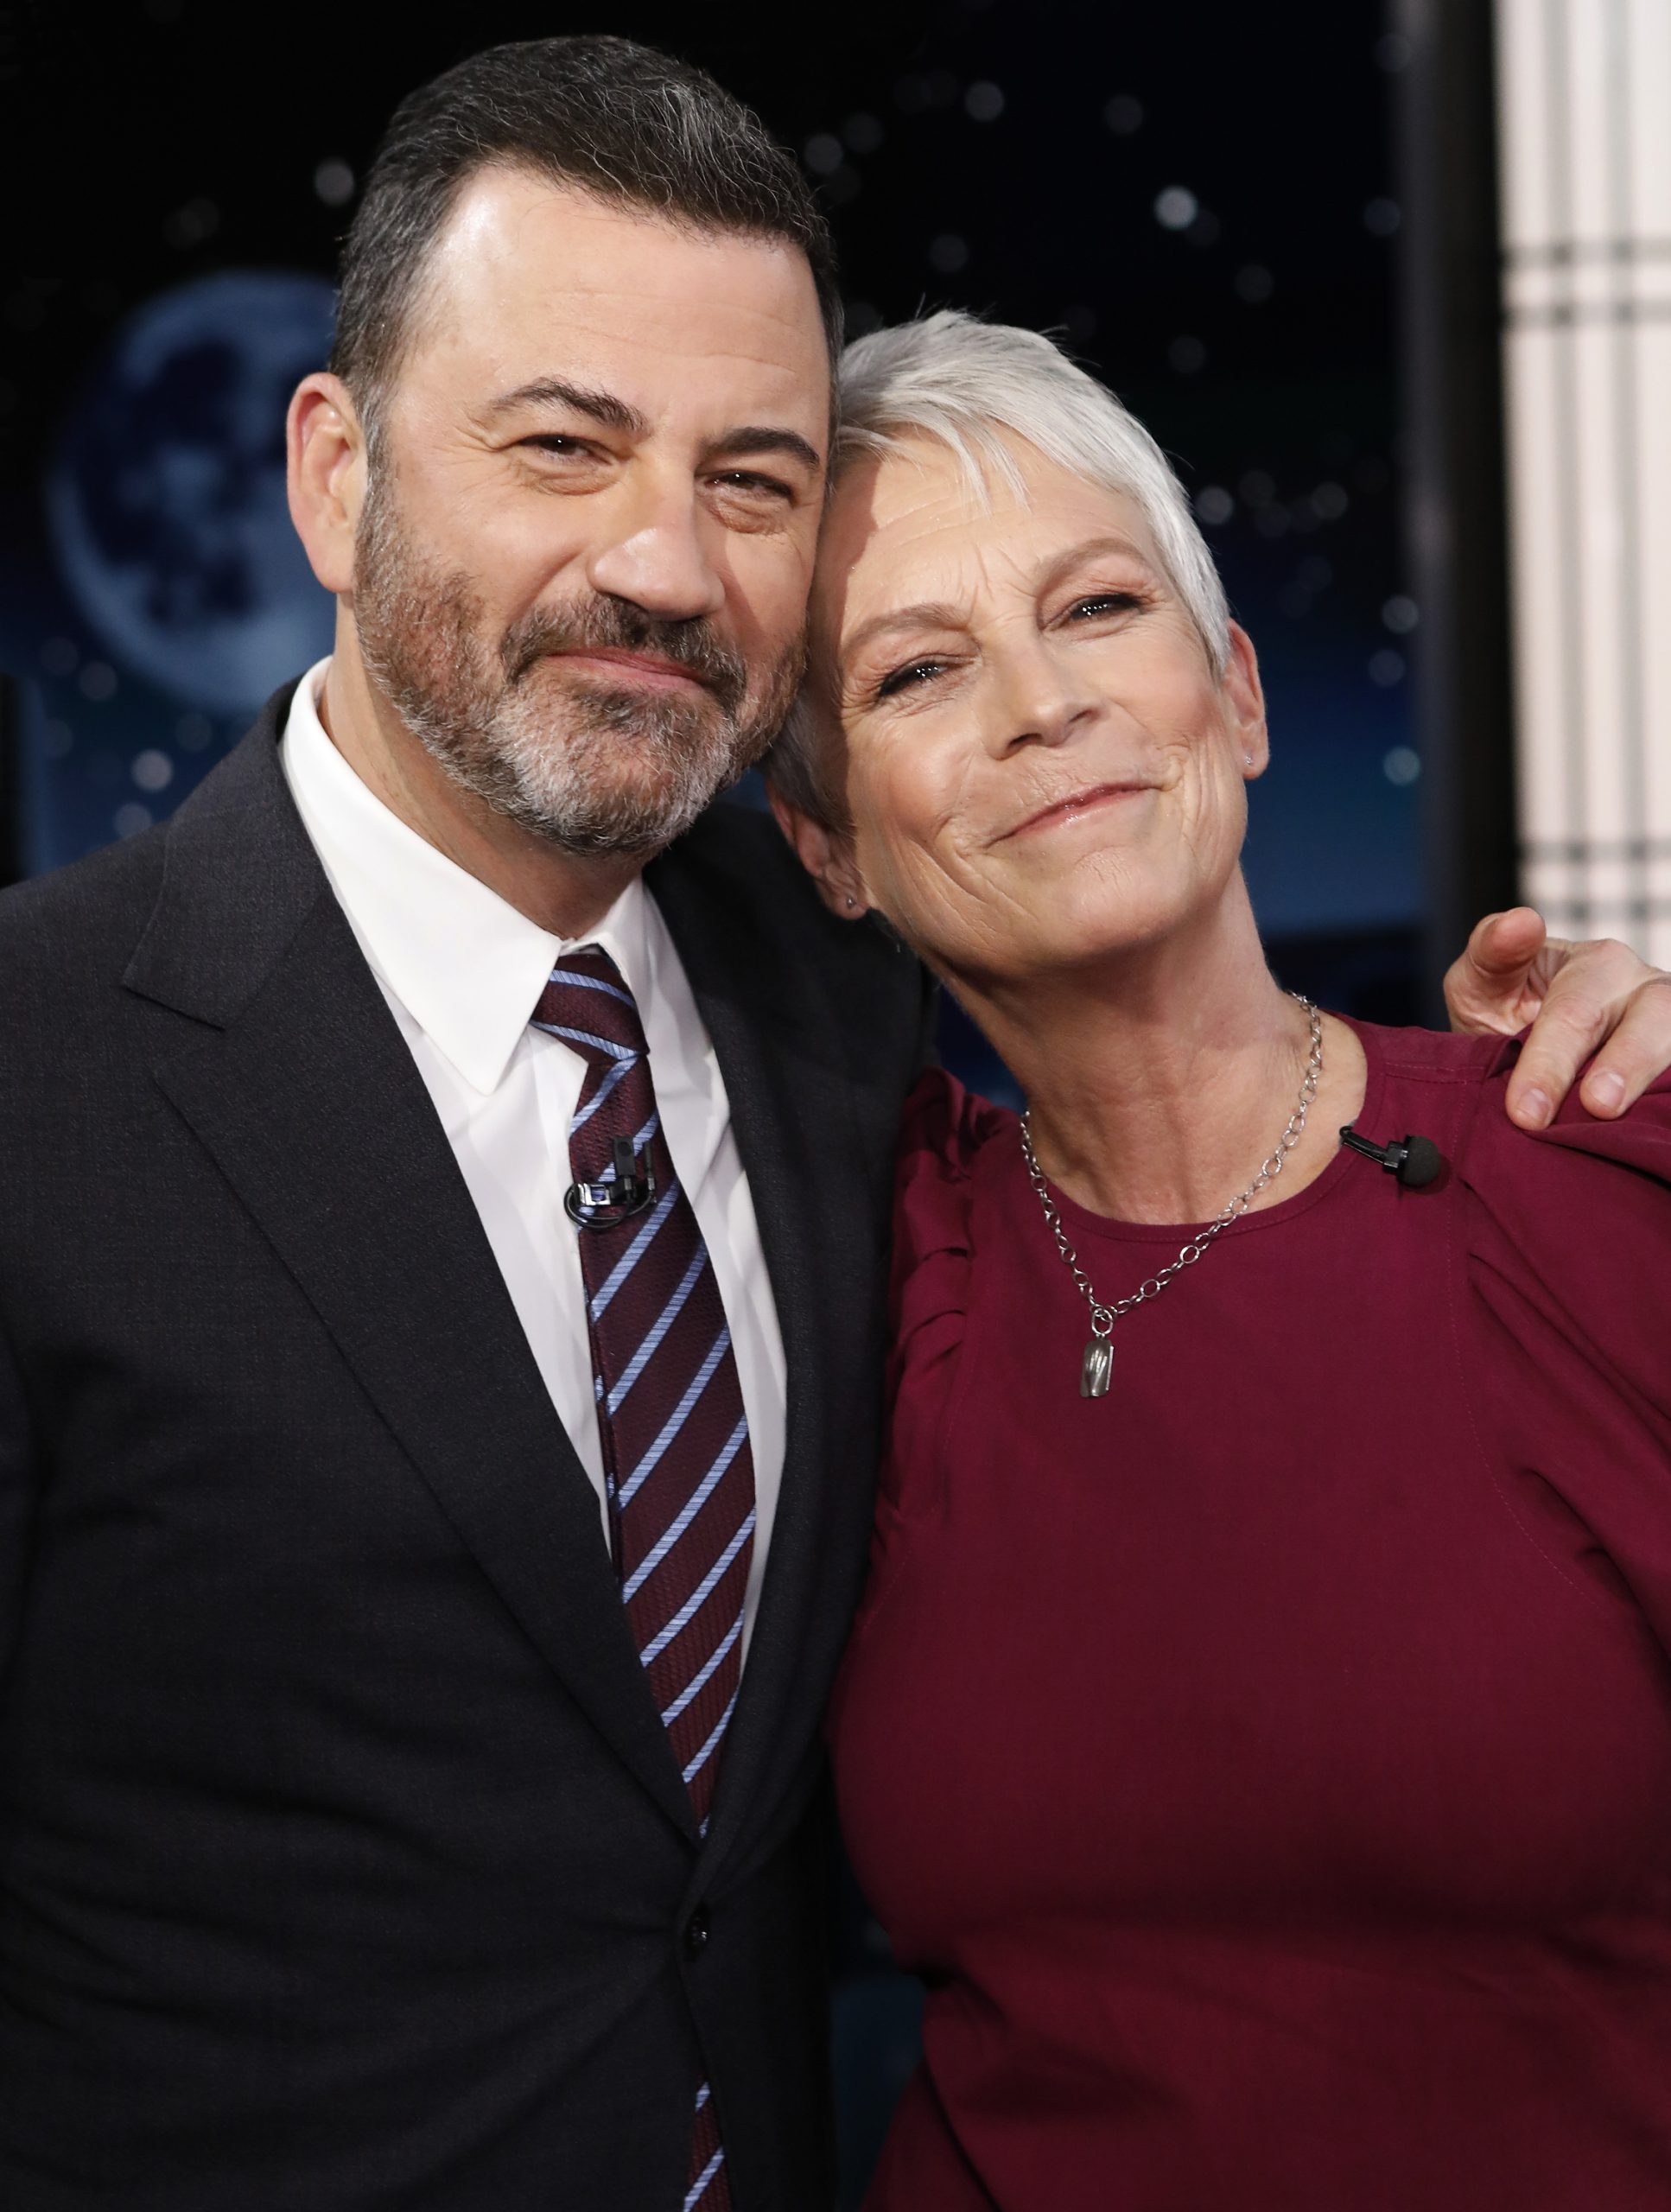 In Case You Missed It: Jamie Lee Curtis On ‘Jimmy Kimmel Live’